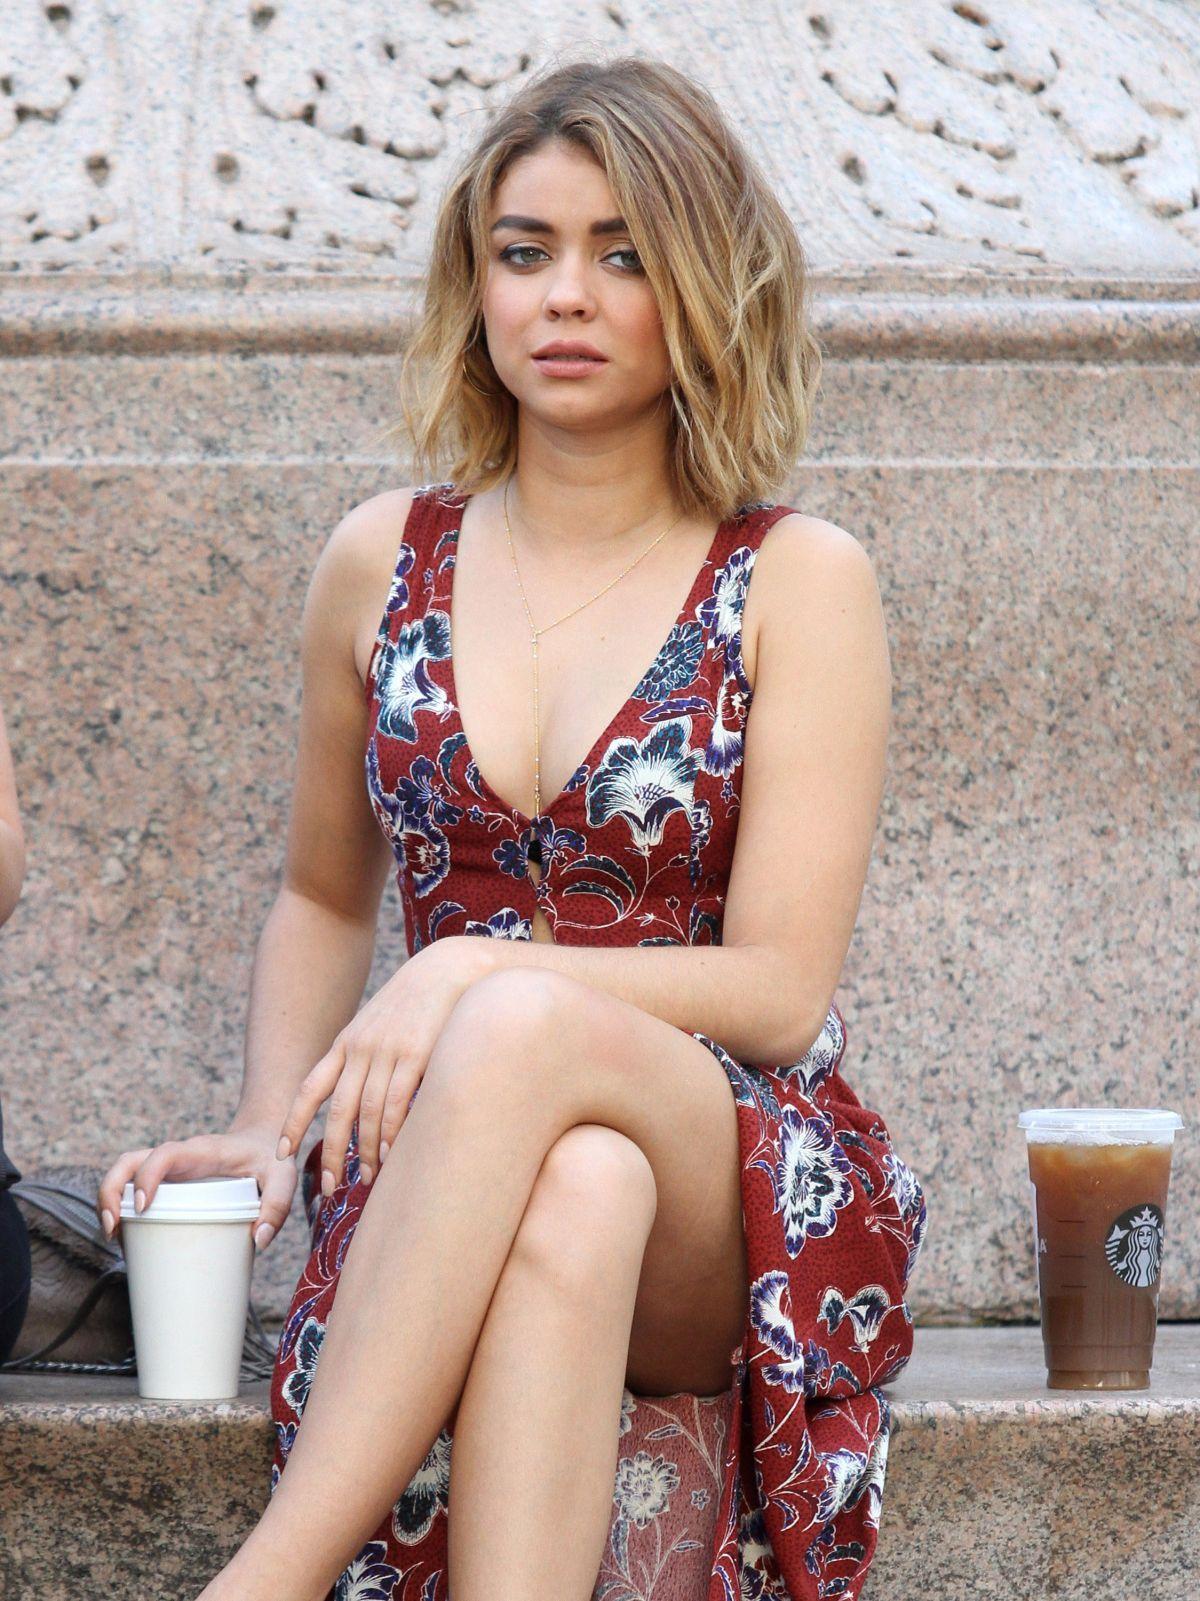 SARAH HYLAND On The Set Of 'Modern Family' In New York 08 25 2016